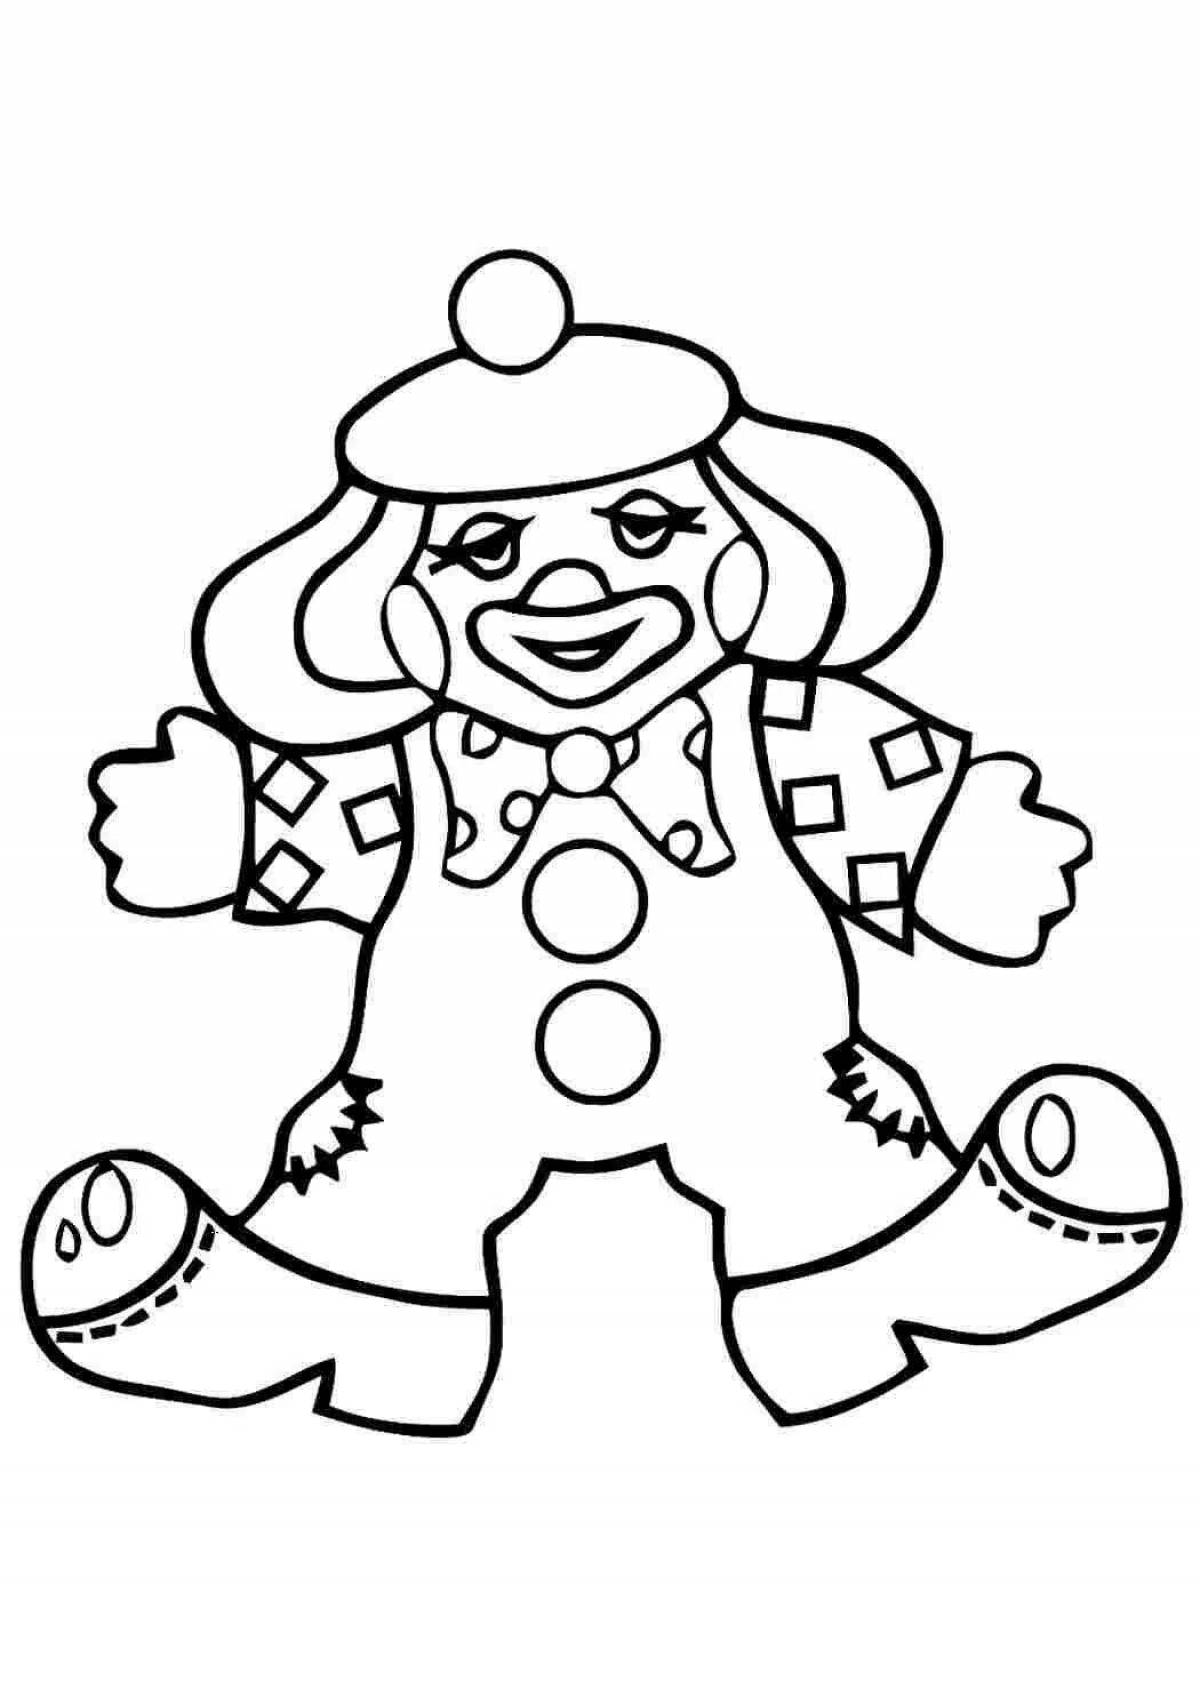 Sparkling clown coloring book for kids